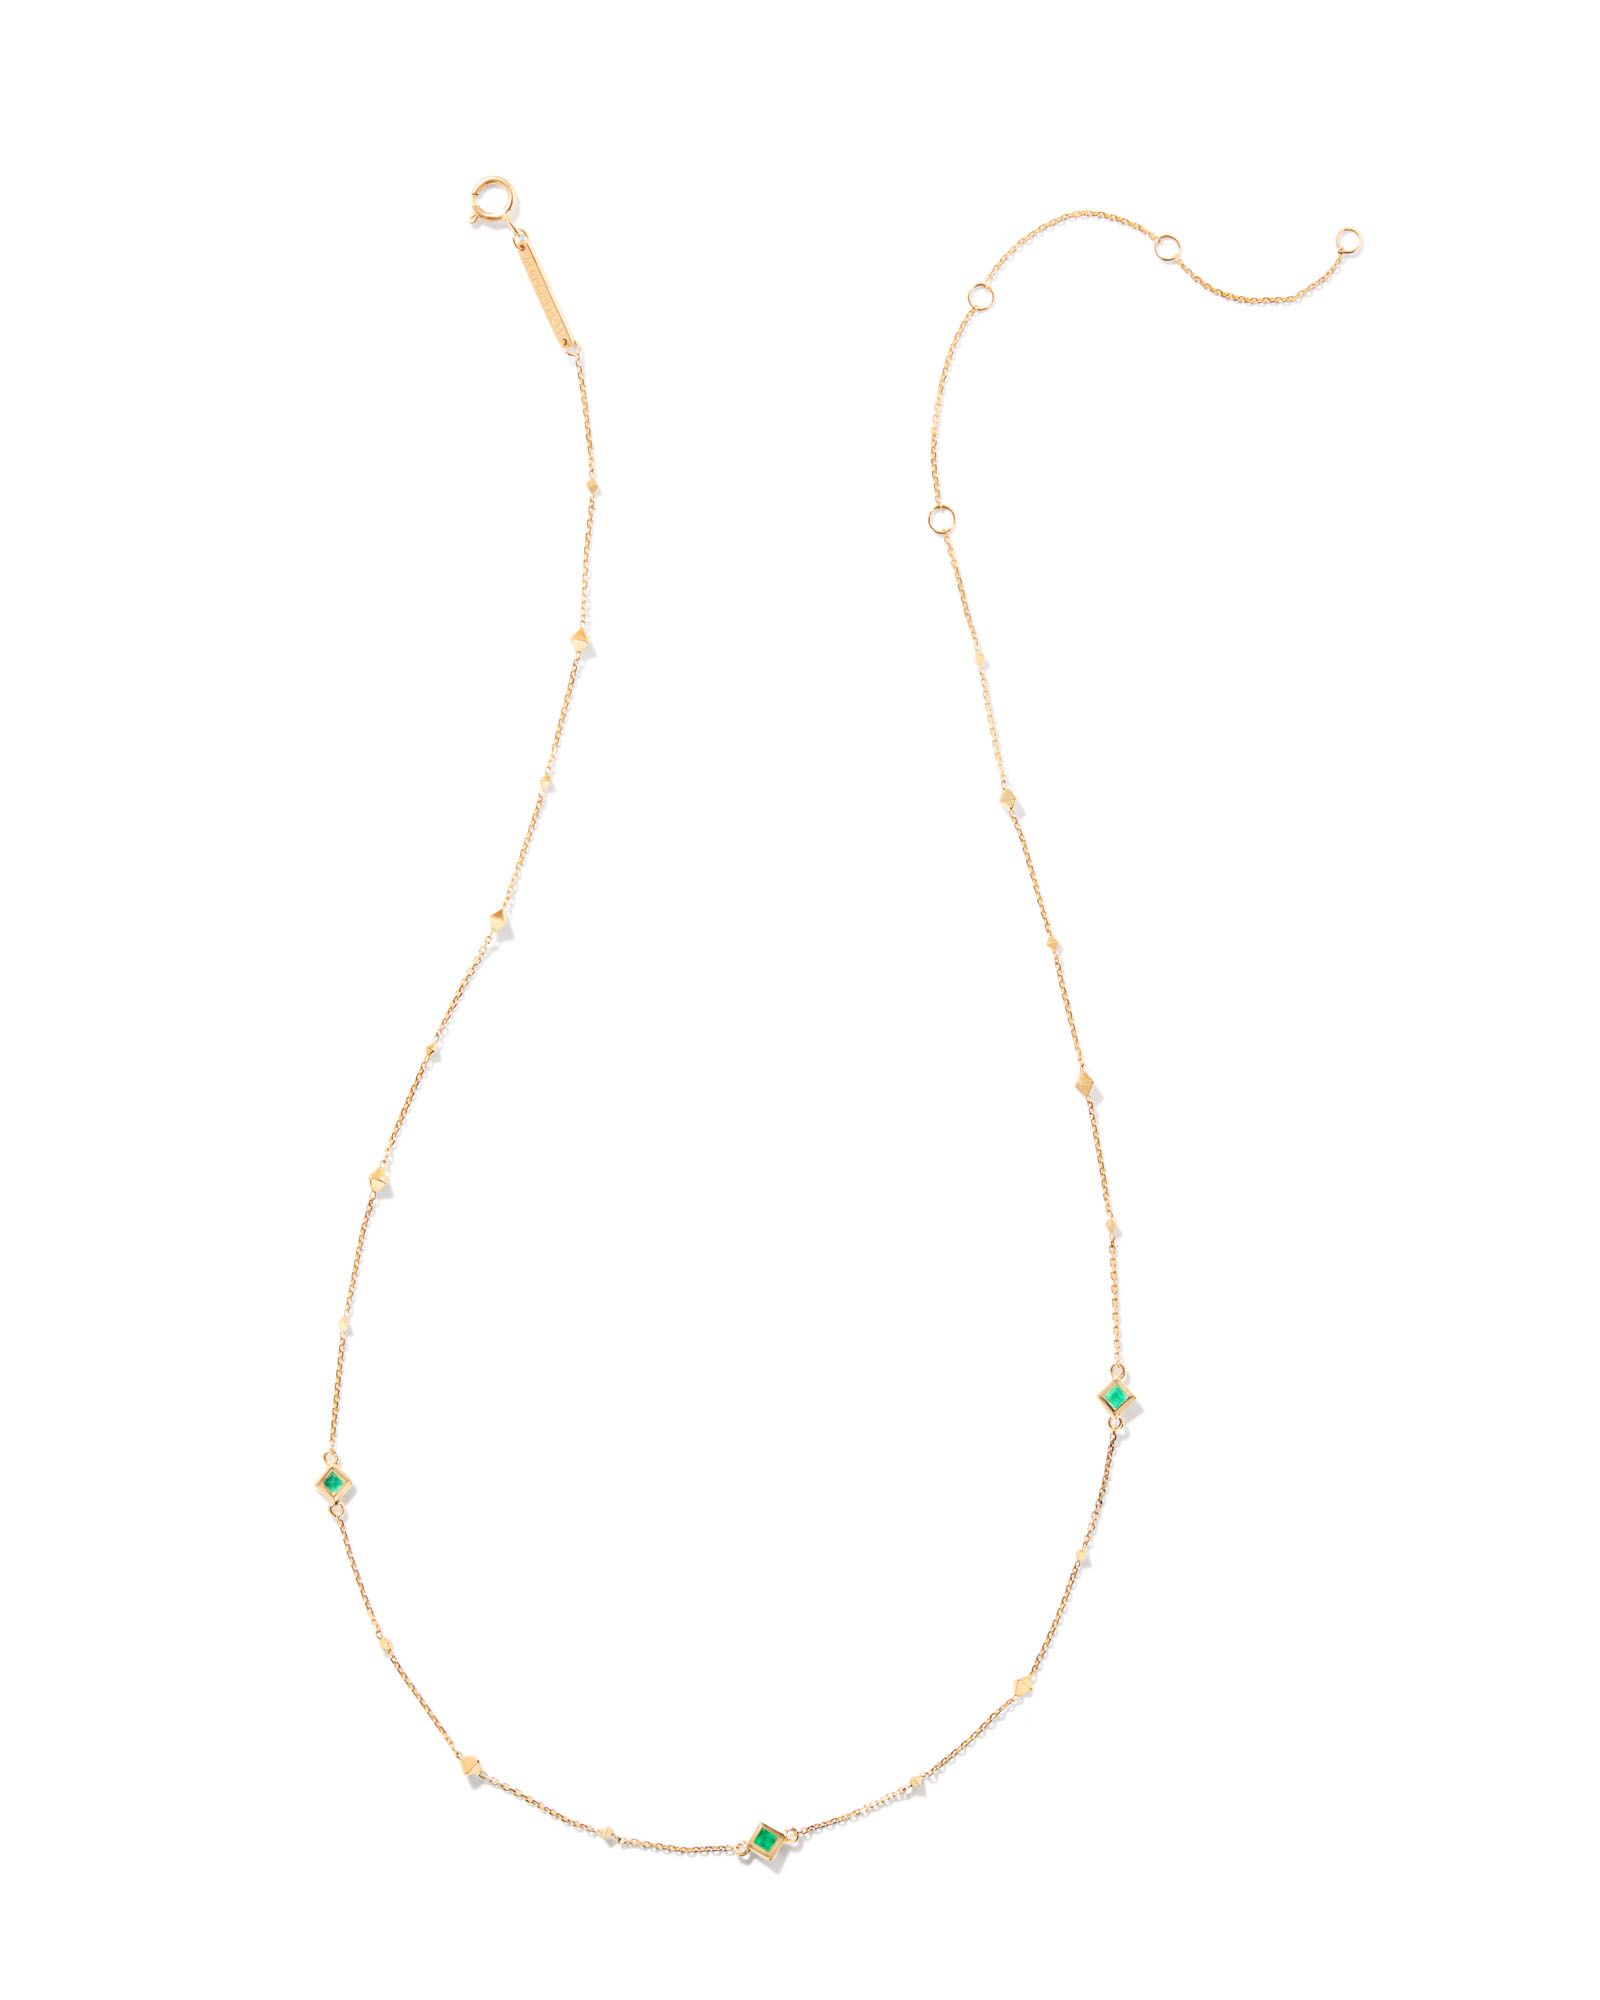 Michelle 14k Yellow Gold Strand Necklace in Emerald | Kendra Scott